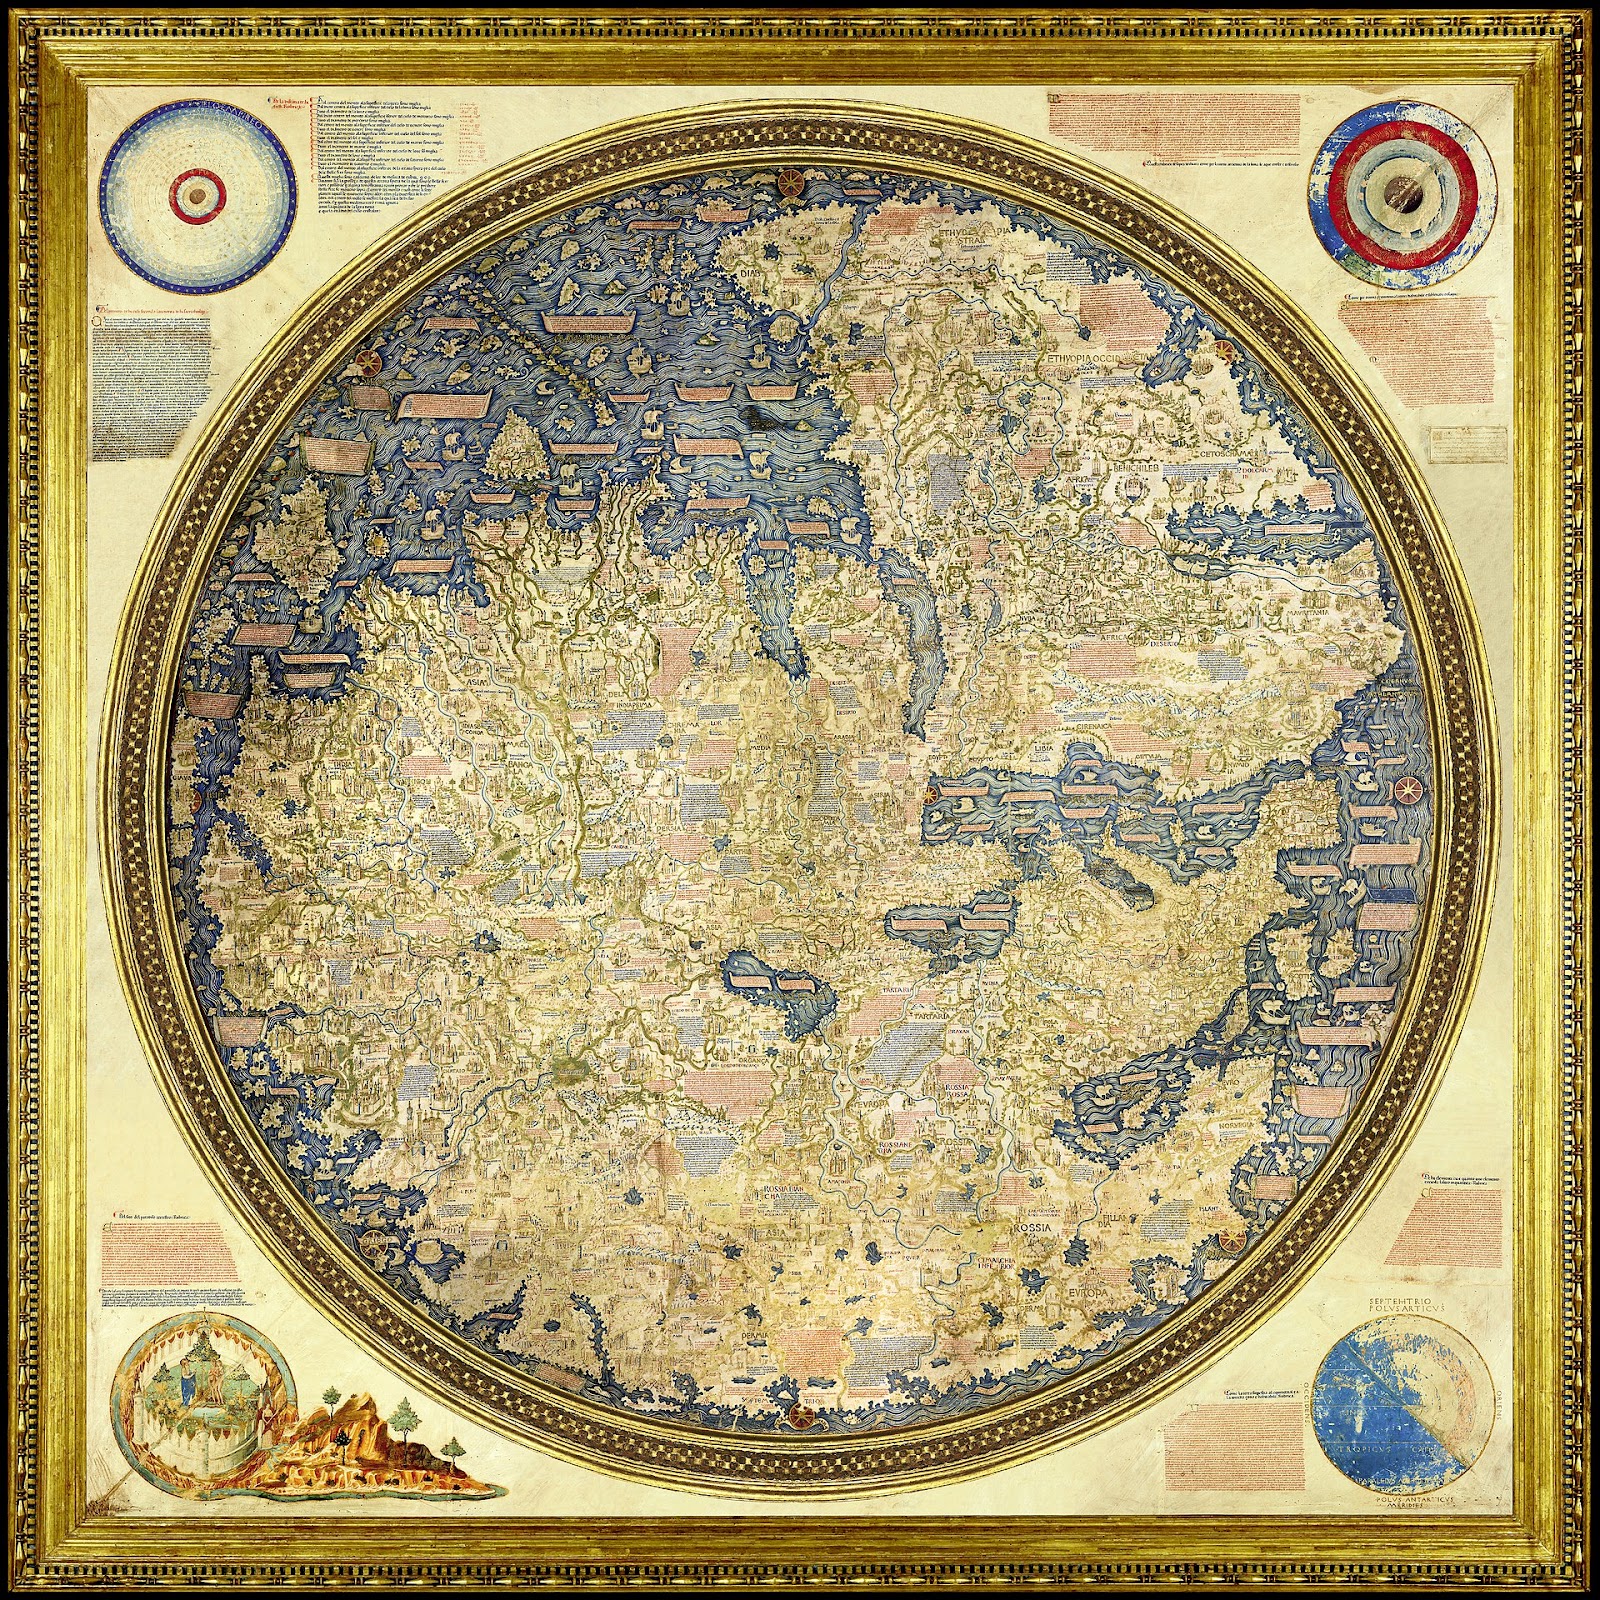 The Fra Mauro map is a map of the ‘known’ world made around 1459, before Christopher Columbus discovered America and is considered the greatest memorial of medieval cartography in existence.